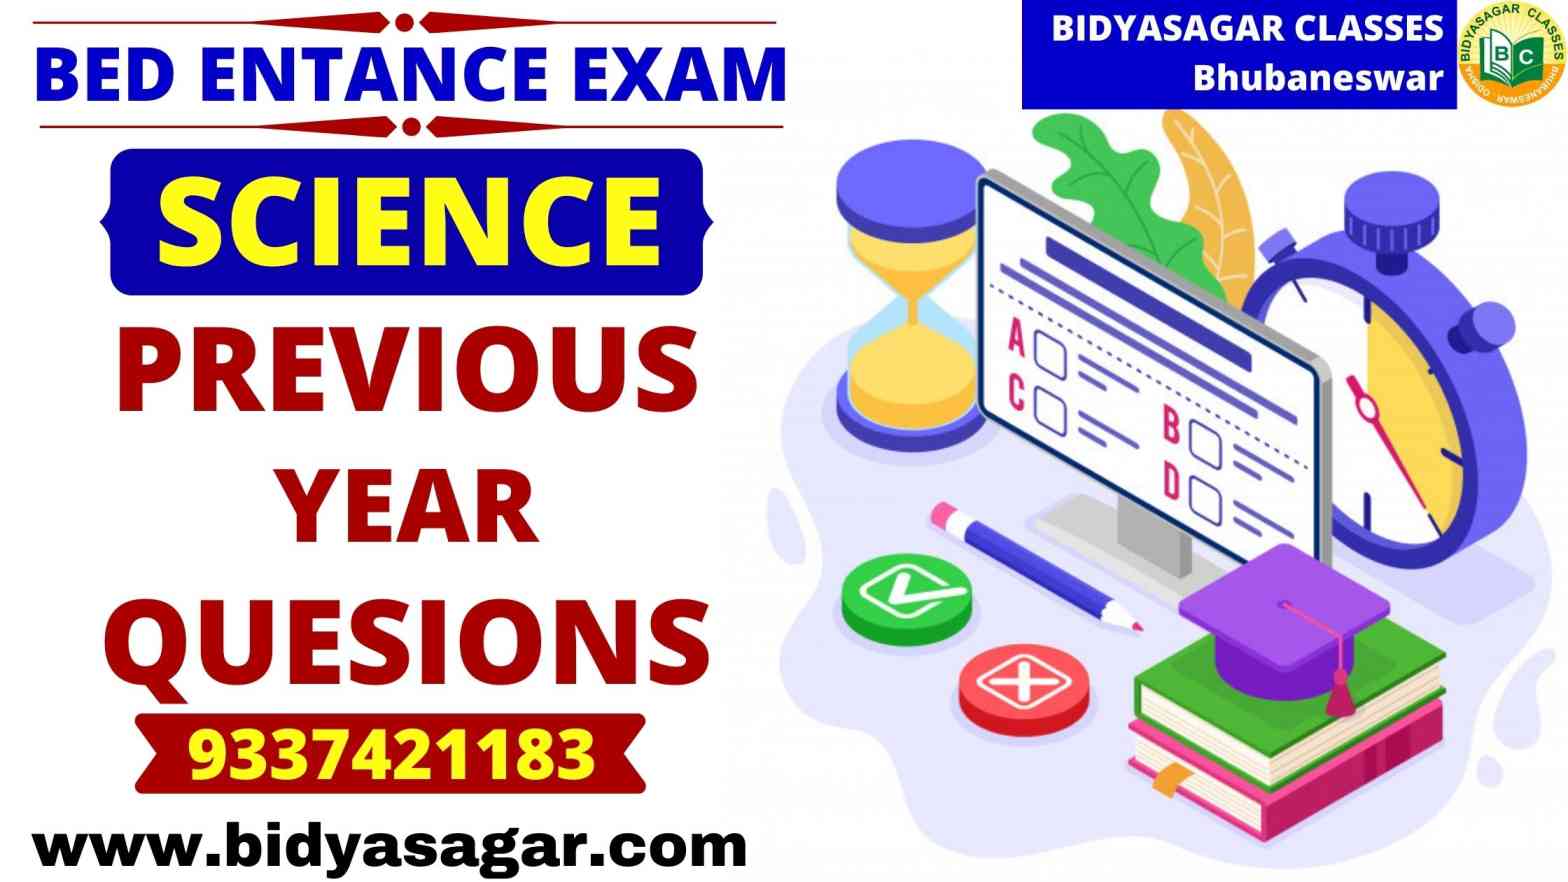 Odisha State B.Ed Entrance Exam Science Previous Year Questions